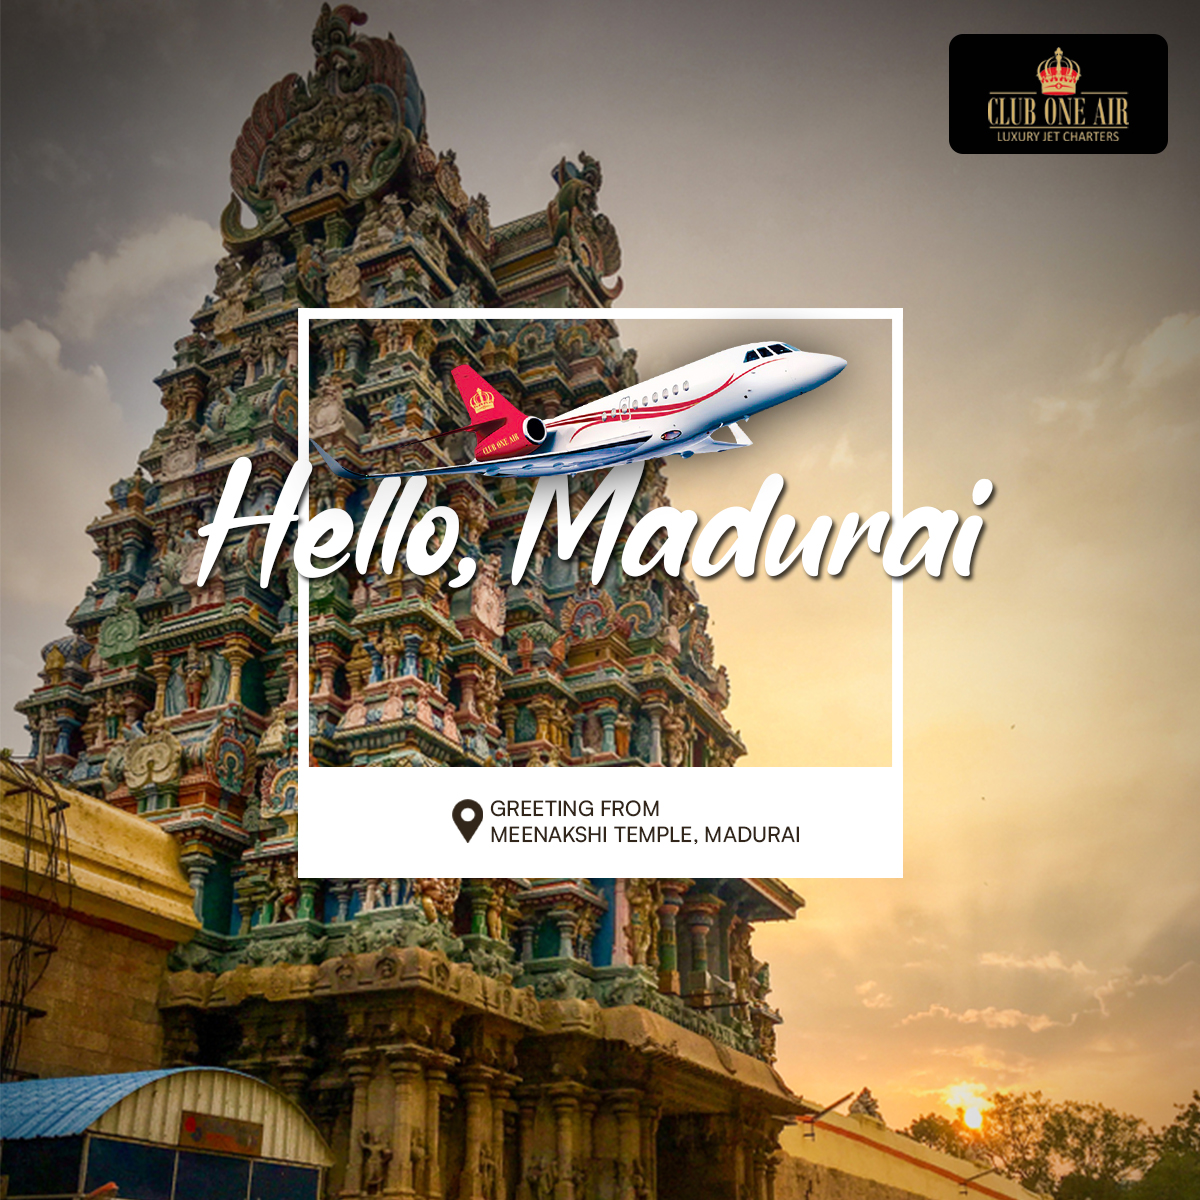 Hello, Madurai!
Leave your #stress behind and visit #Madurai and explore the #beauty of #SouthIndia.

#aviation #aviationdaily #charterplanes #privatejet #aeroplane #Airline #travel #charterairline #charterplane #luxurioustravel #traveltheworld #privateplane #ClubOneAir